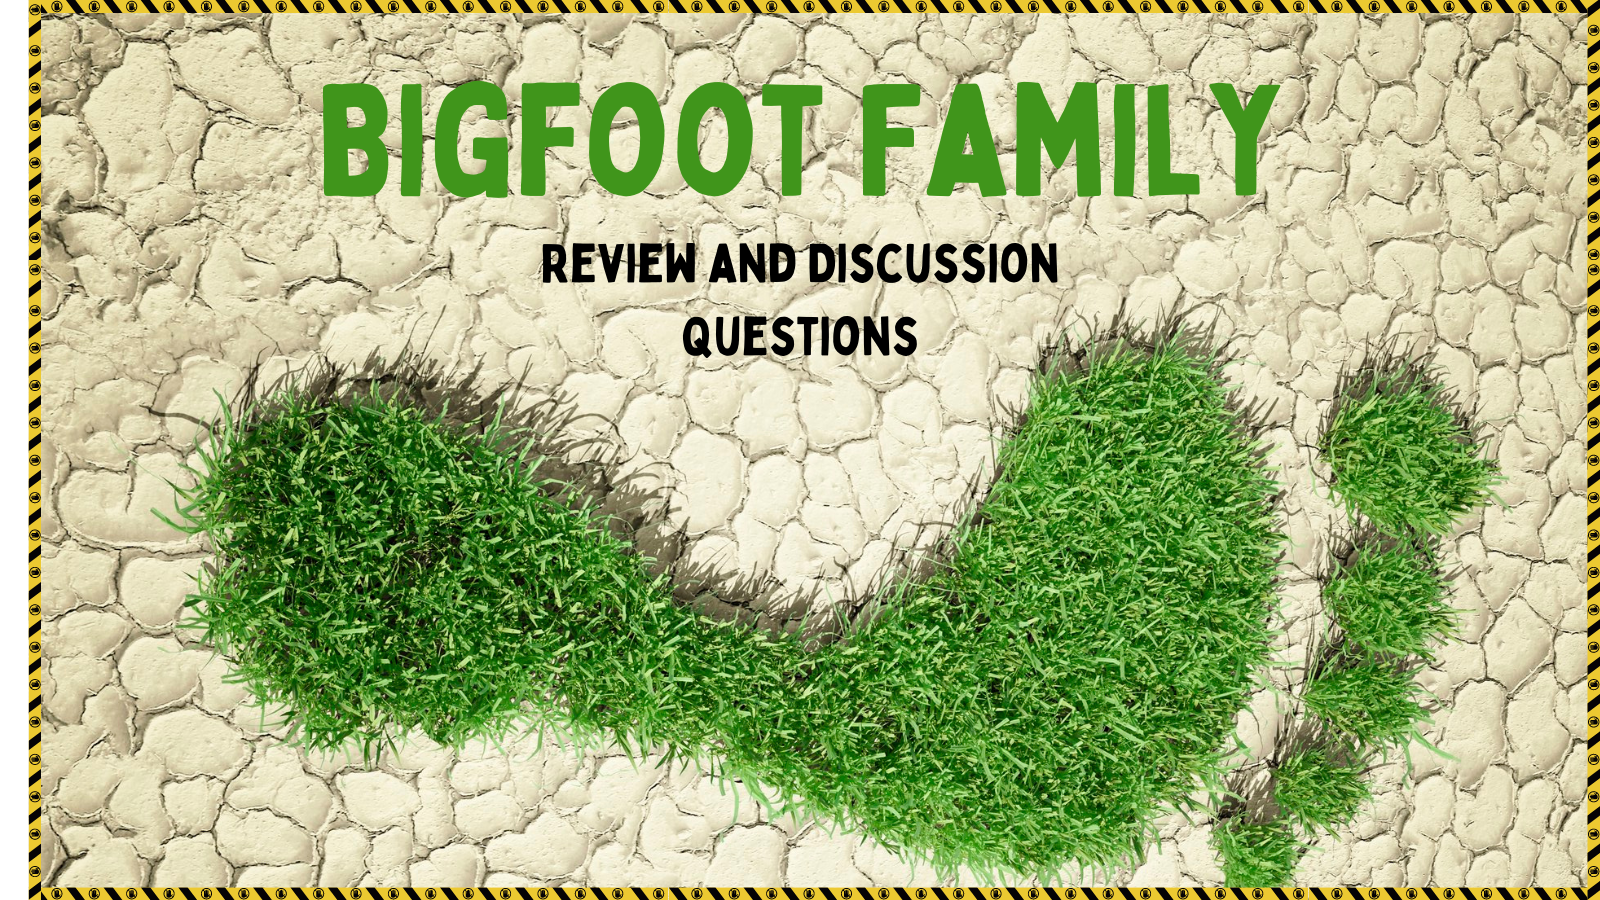 Bigfoot Family Review, Bigfoot Family discussion